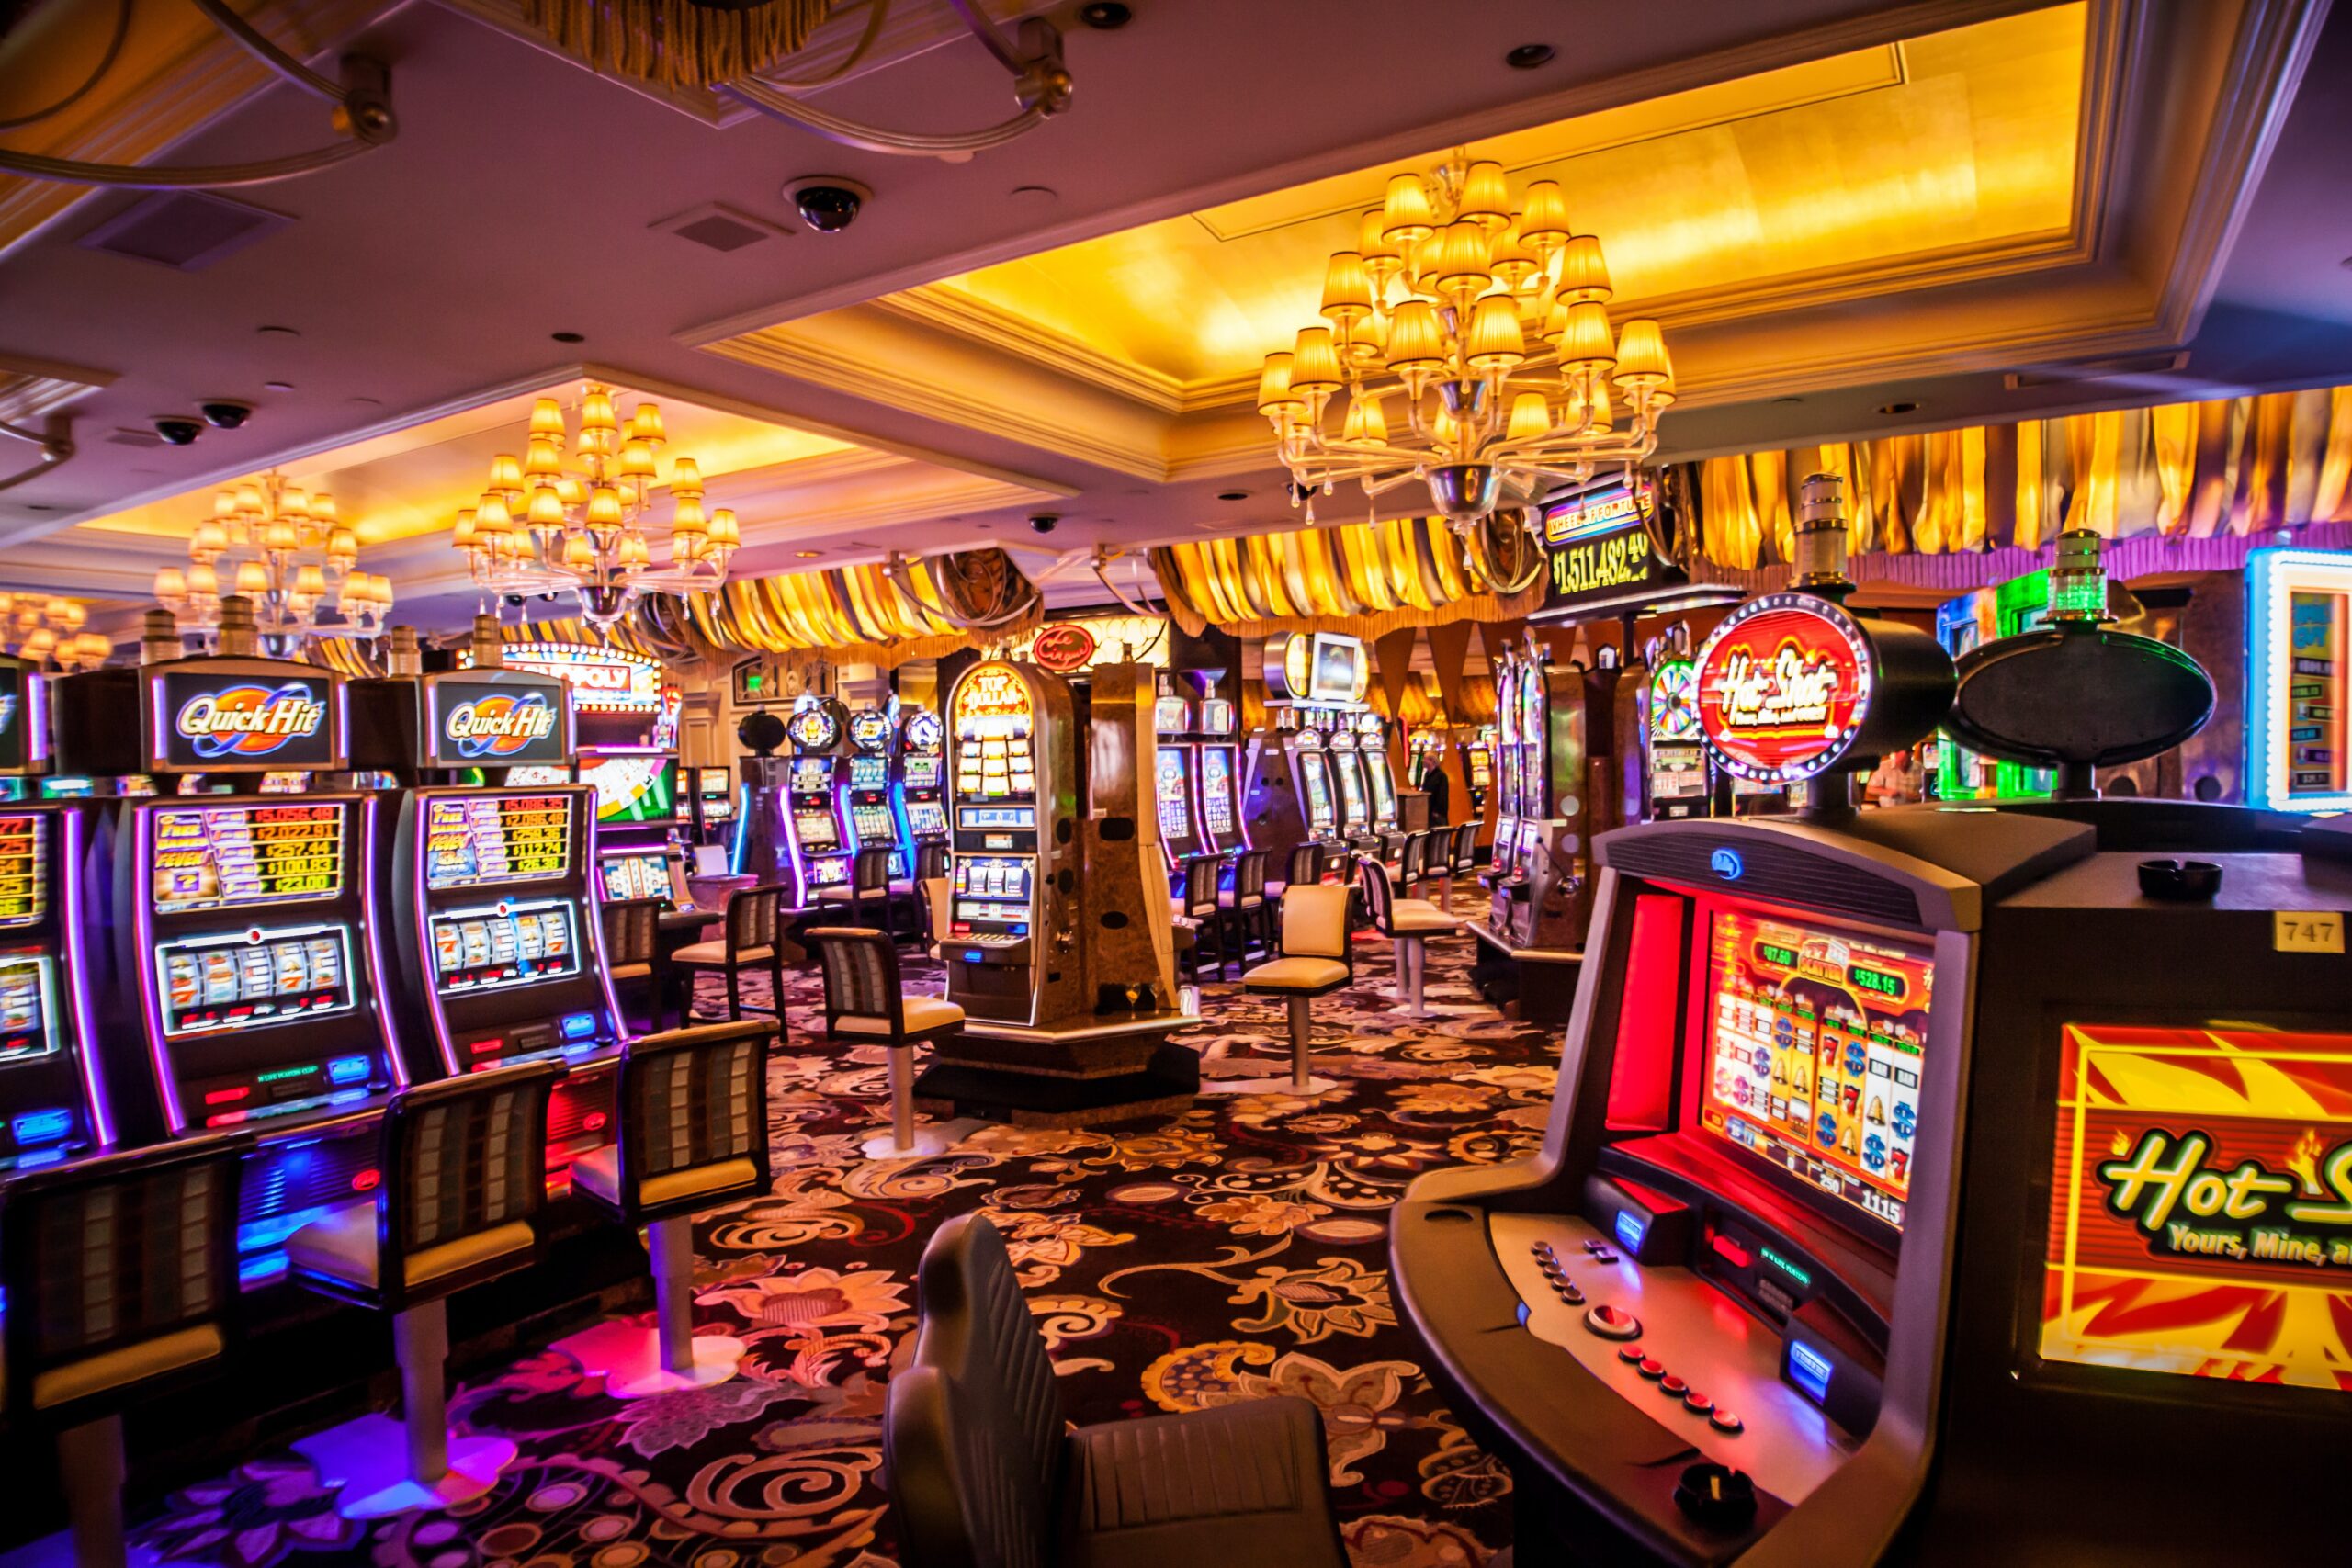 Why Do So Many People Like to Spend Their Time in Casinos